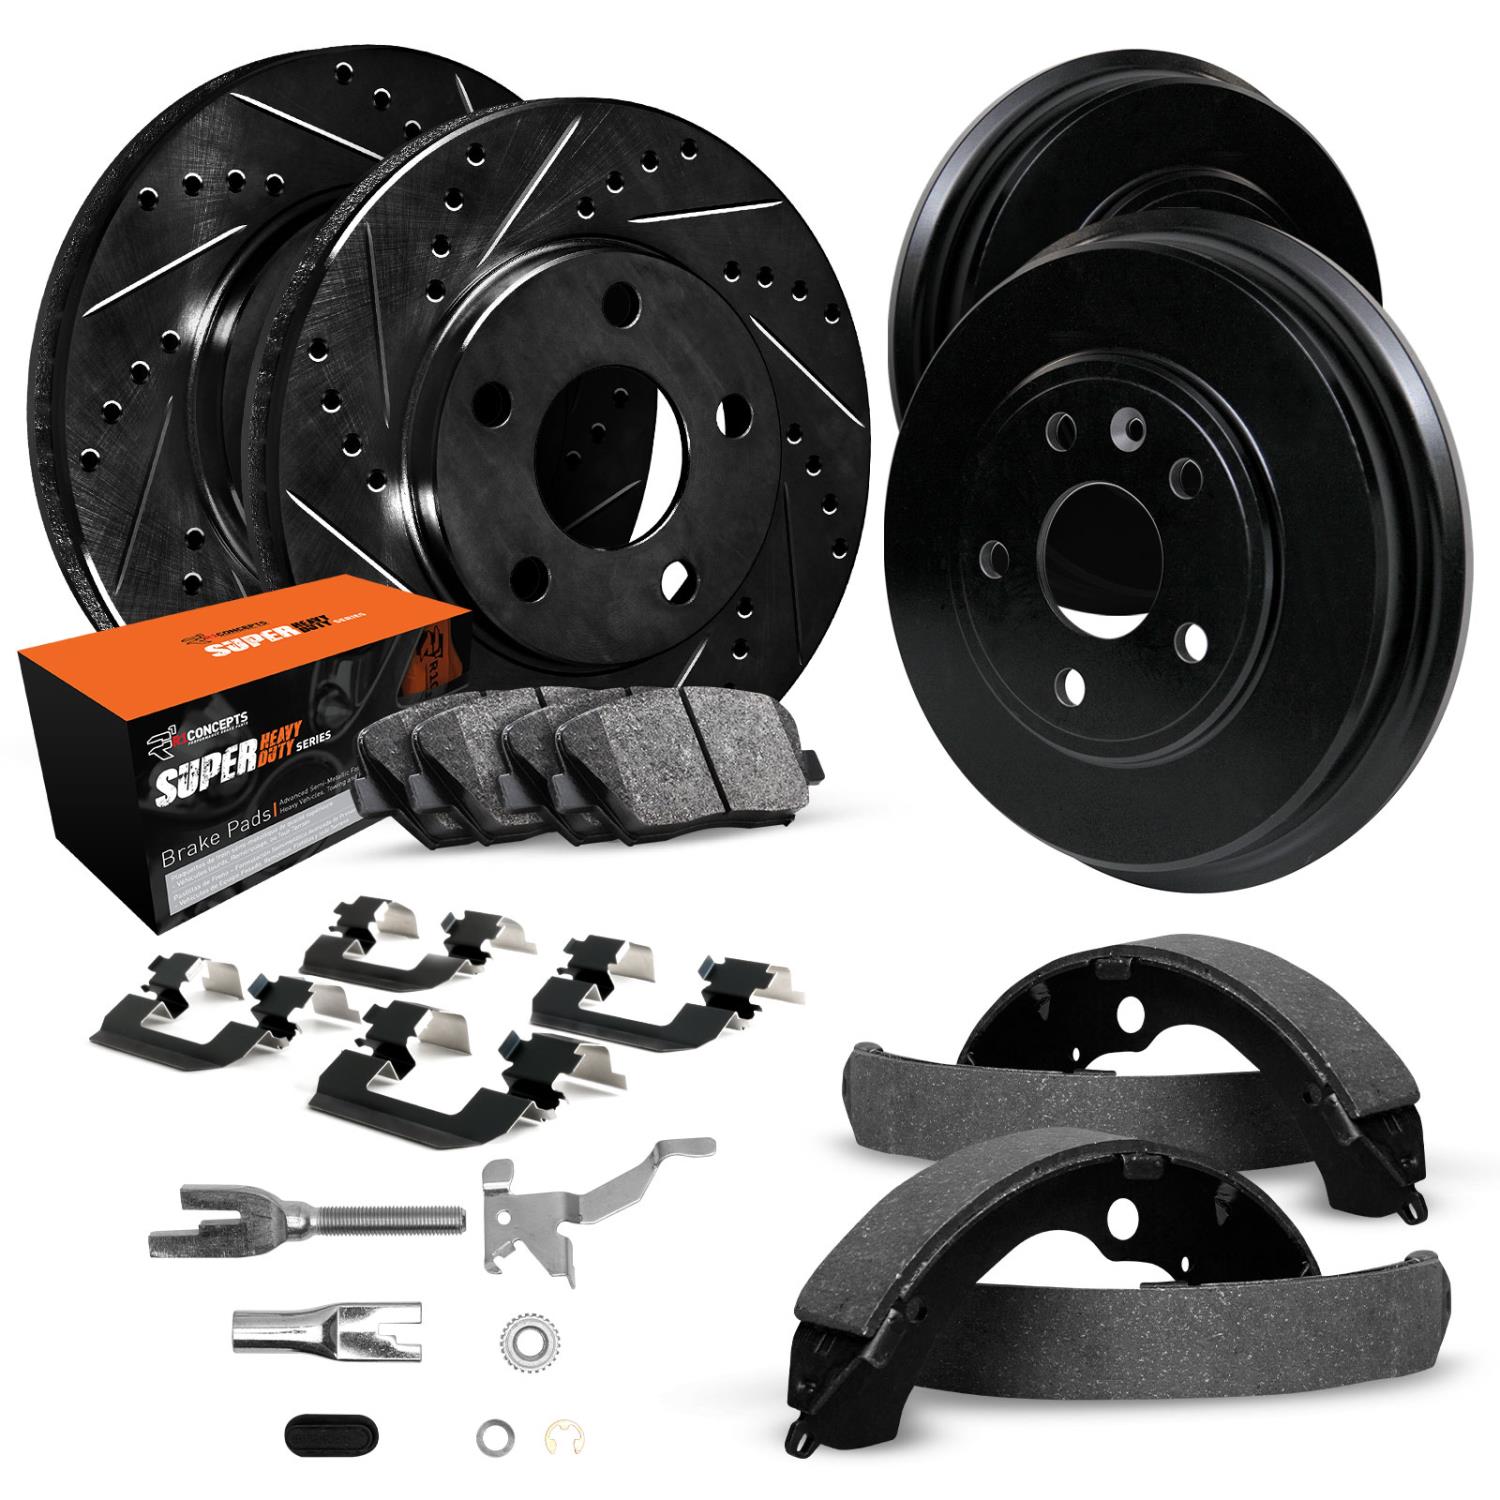 E-Line Slotted Black Brake Rotor & Drum Set w/Super-Duty Pads, Shoes, Hardware/Adjusters, 1986-1989 Ford/Lincoln/Mercury/Mazda